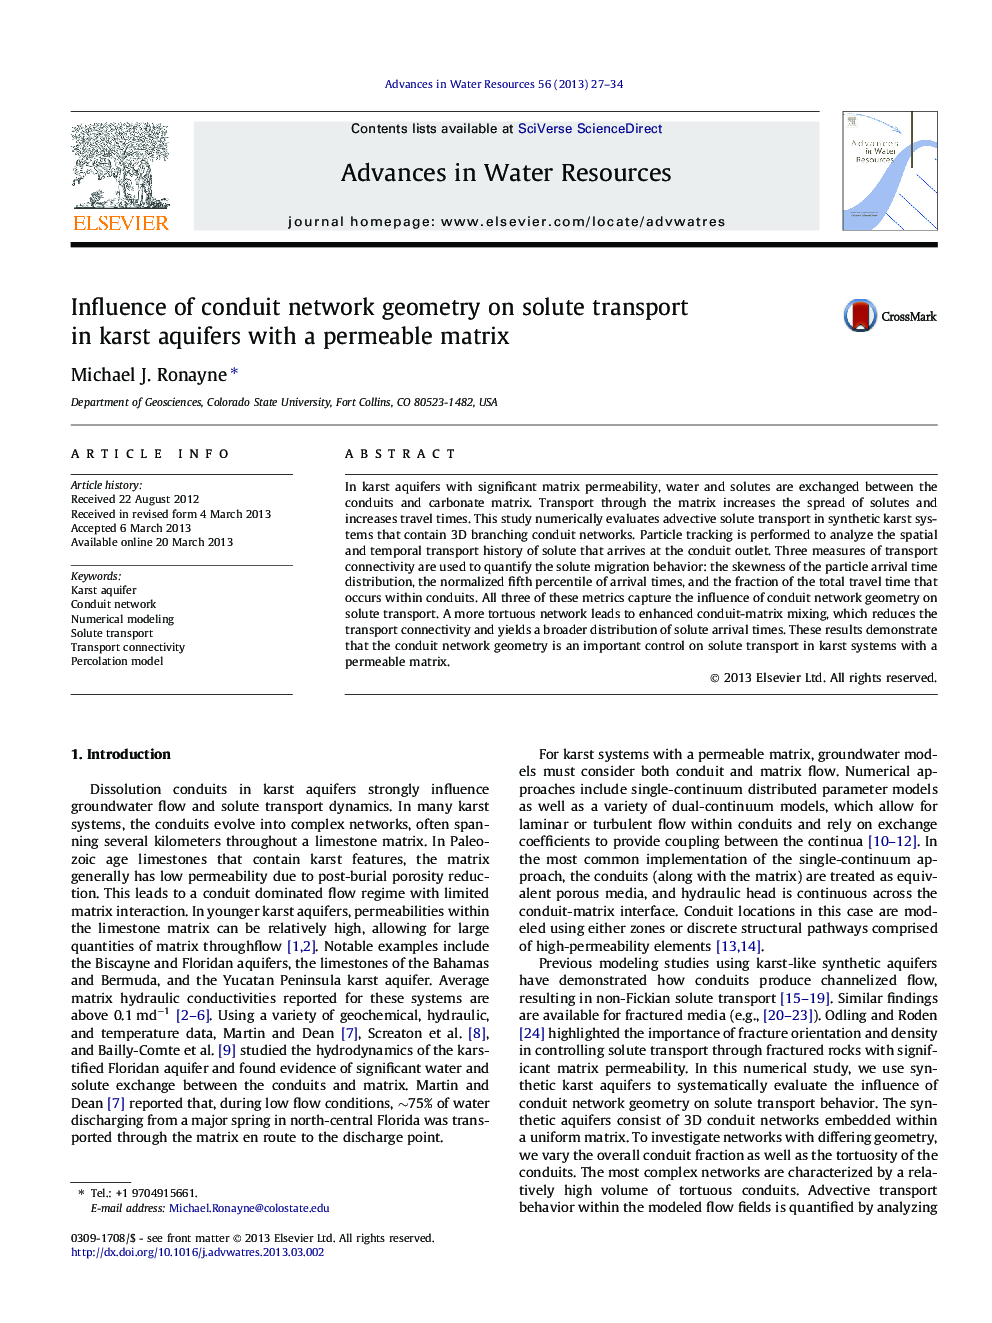 Influence of conduit network geometry on solute transport in karst aquifers with a permeable matrix